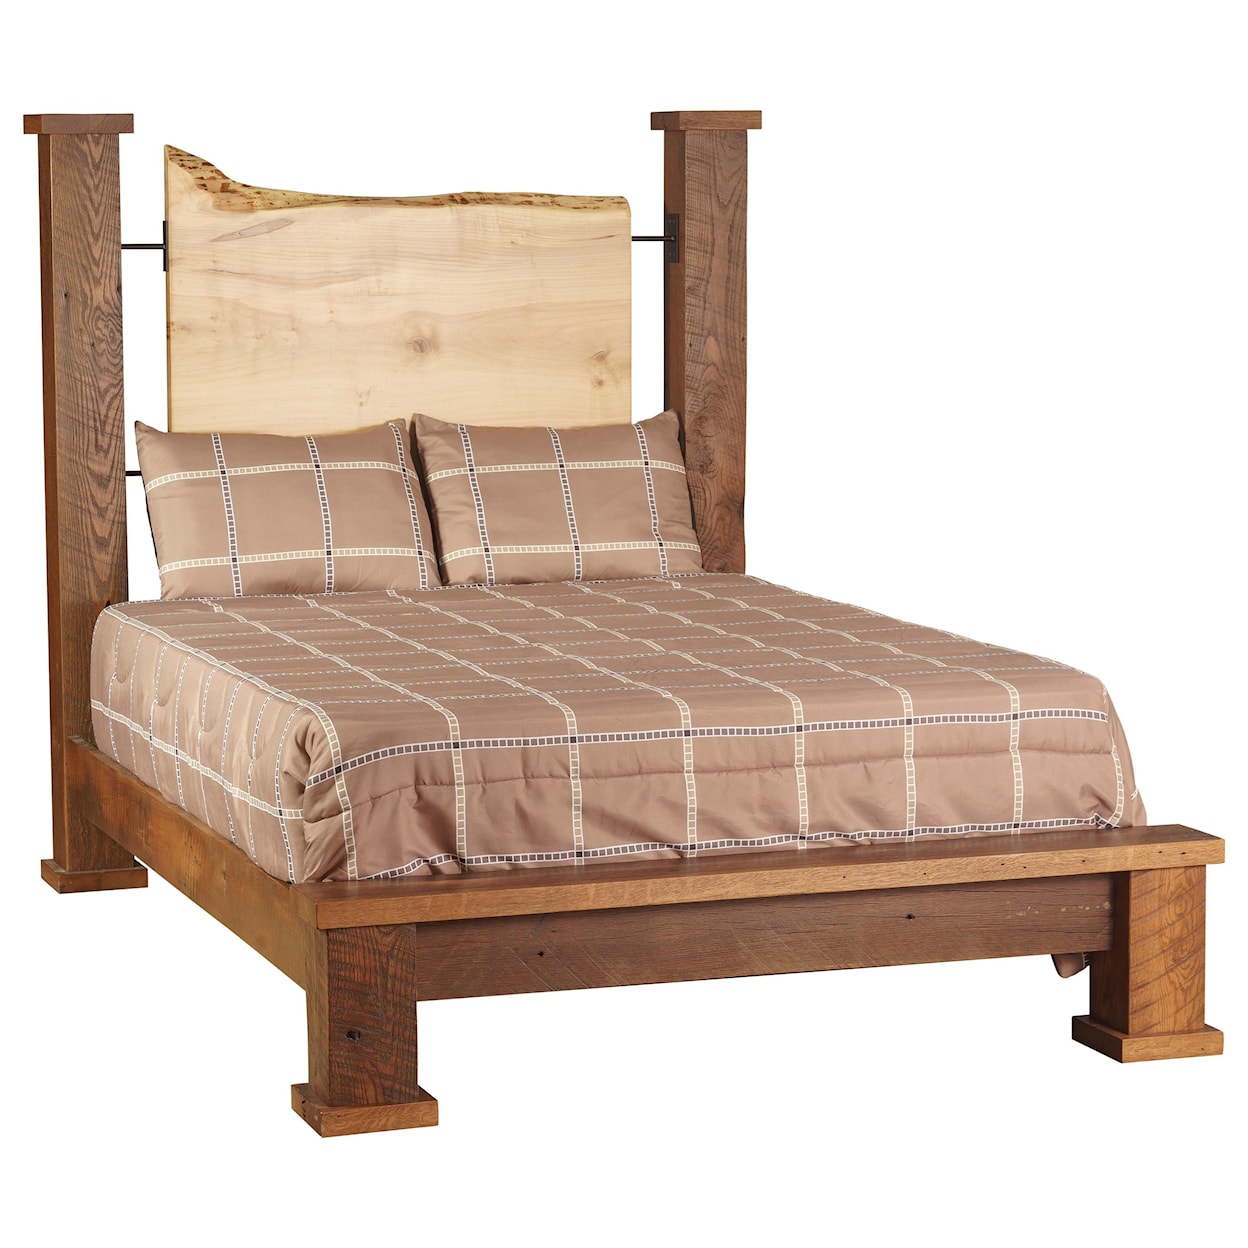 Deer Valley Woodworking Timber Creek King Poster Bed